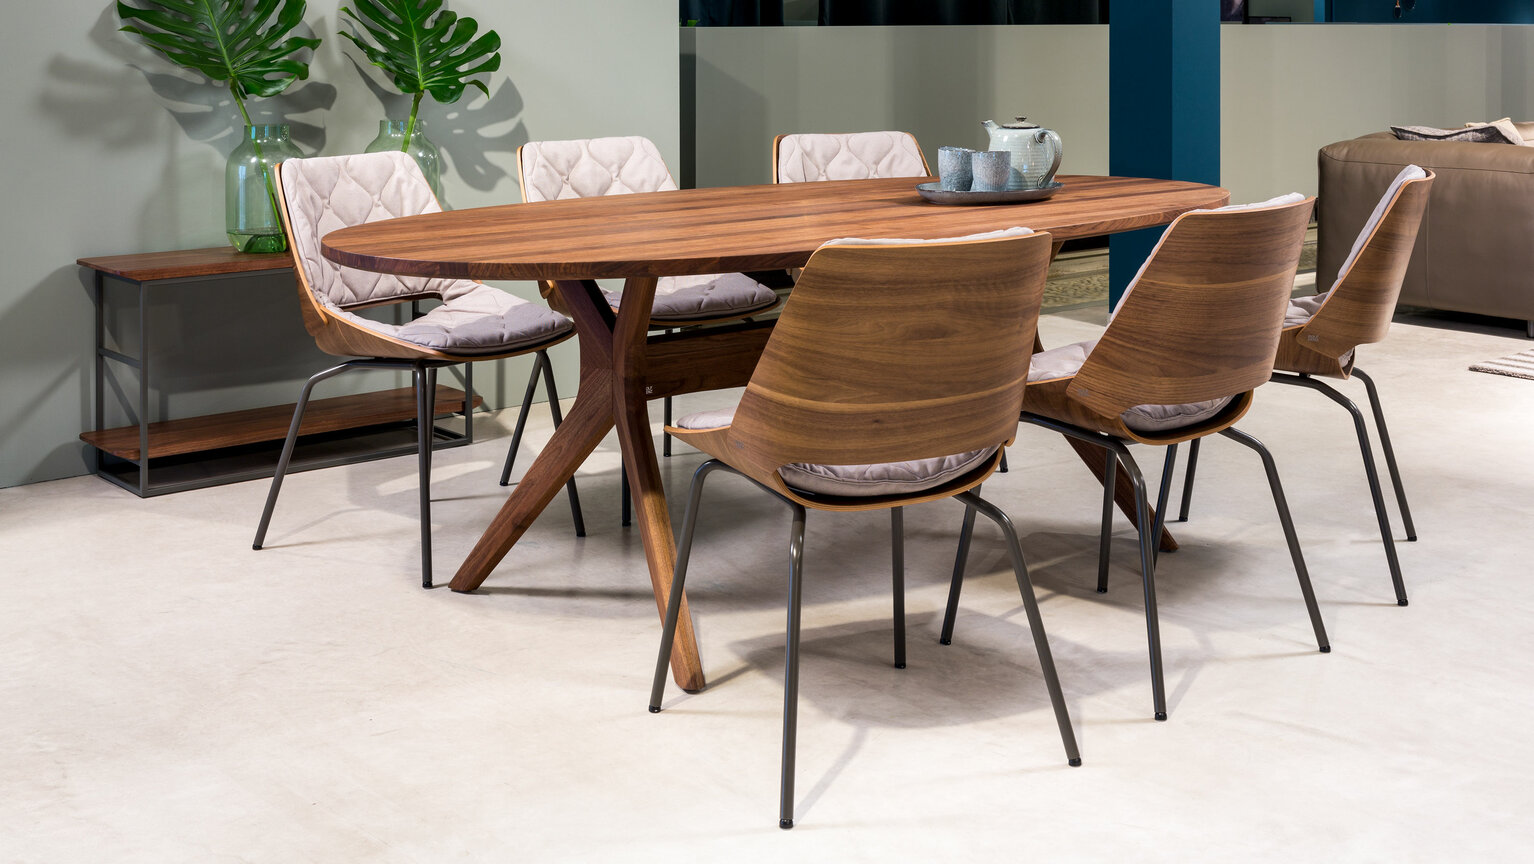 Rolf Benz 965 dining table 650 chairs